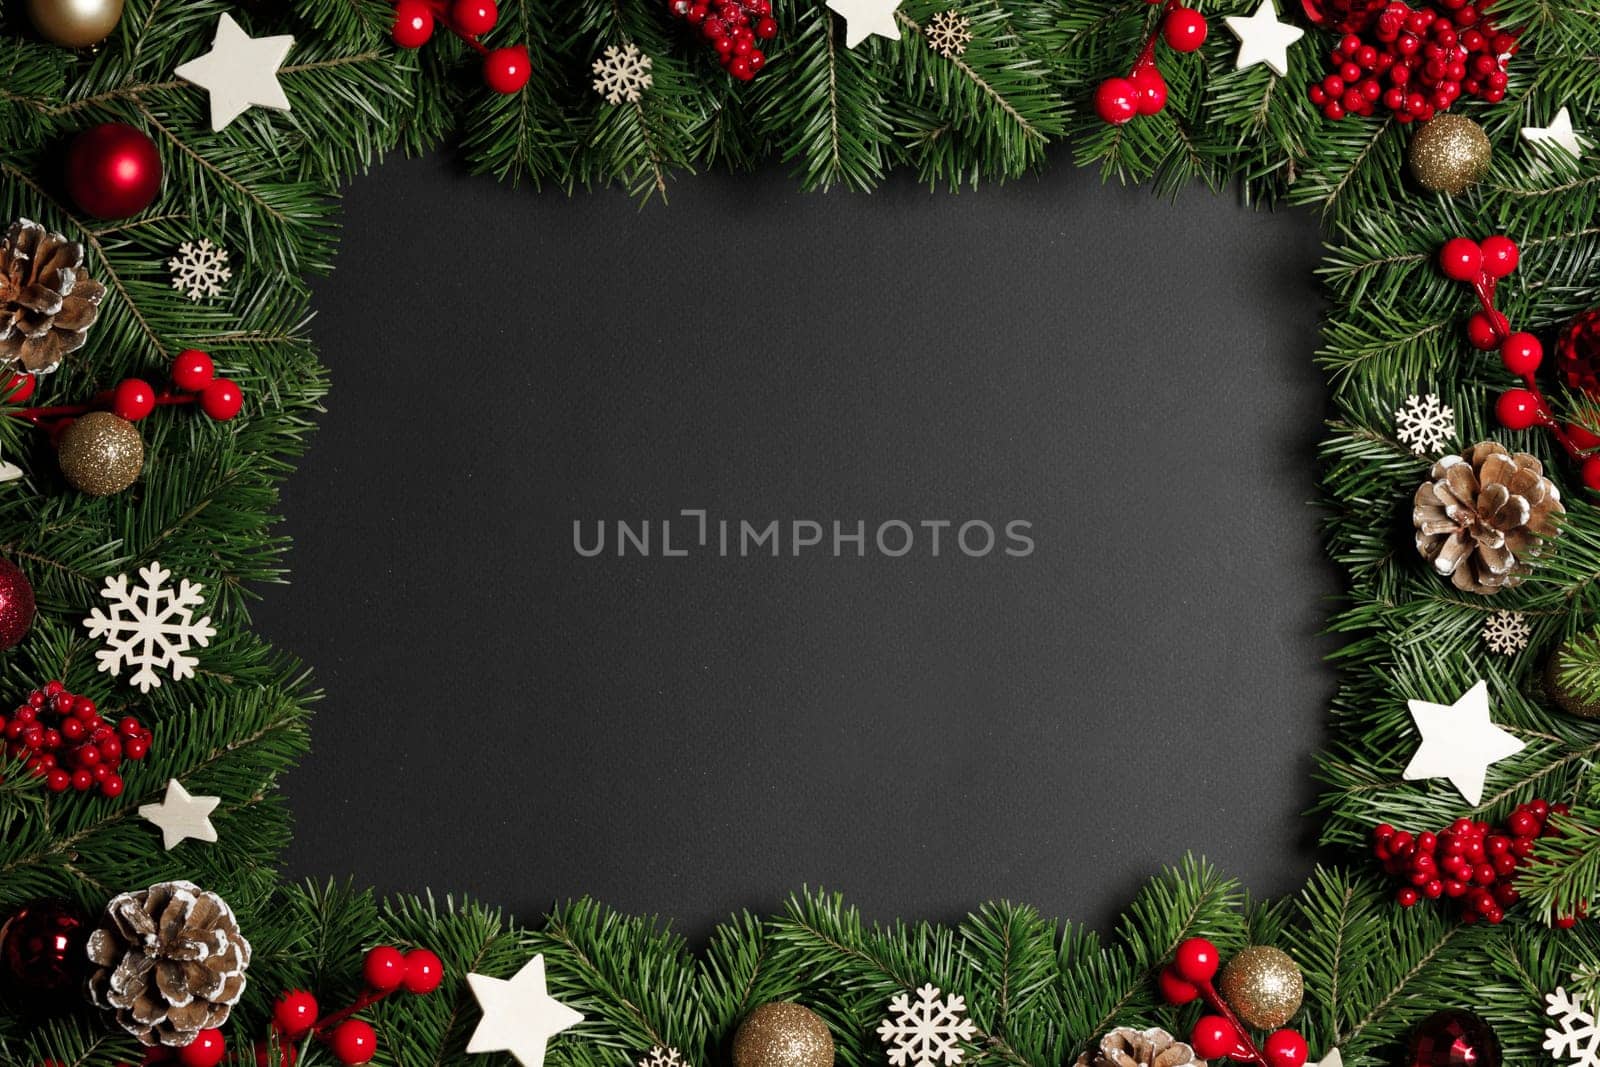 Christmas Border frame of tree branches on black background with copy space , red and wooden decor, berries, stars, cones